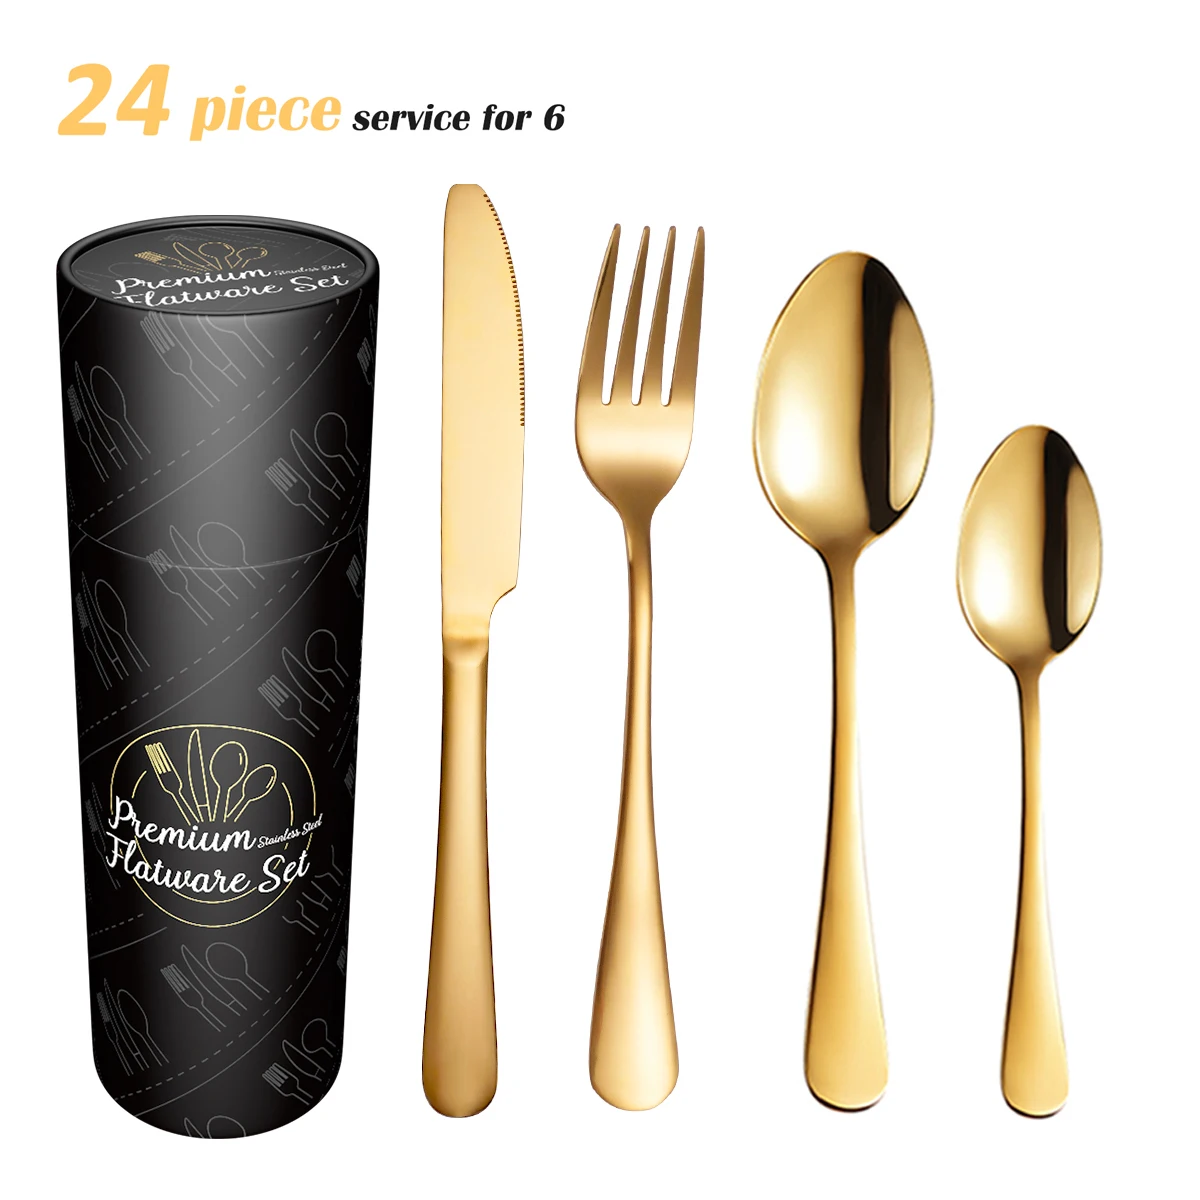 

Wedding Flatware Stainless Steel Wholesale 24pc Knife Fork Spoon Mirror Silverware Gift Gold Cutlery Set With Box, Gold,silver,rose gold,black,customized